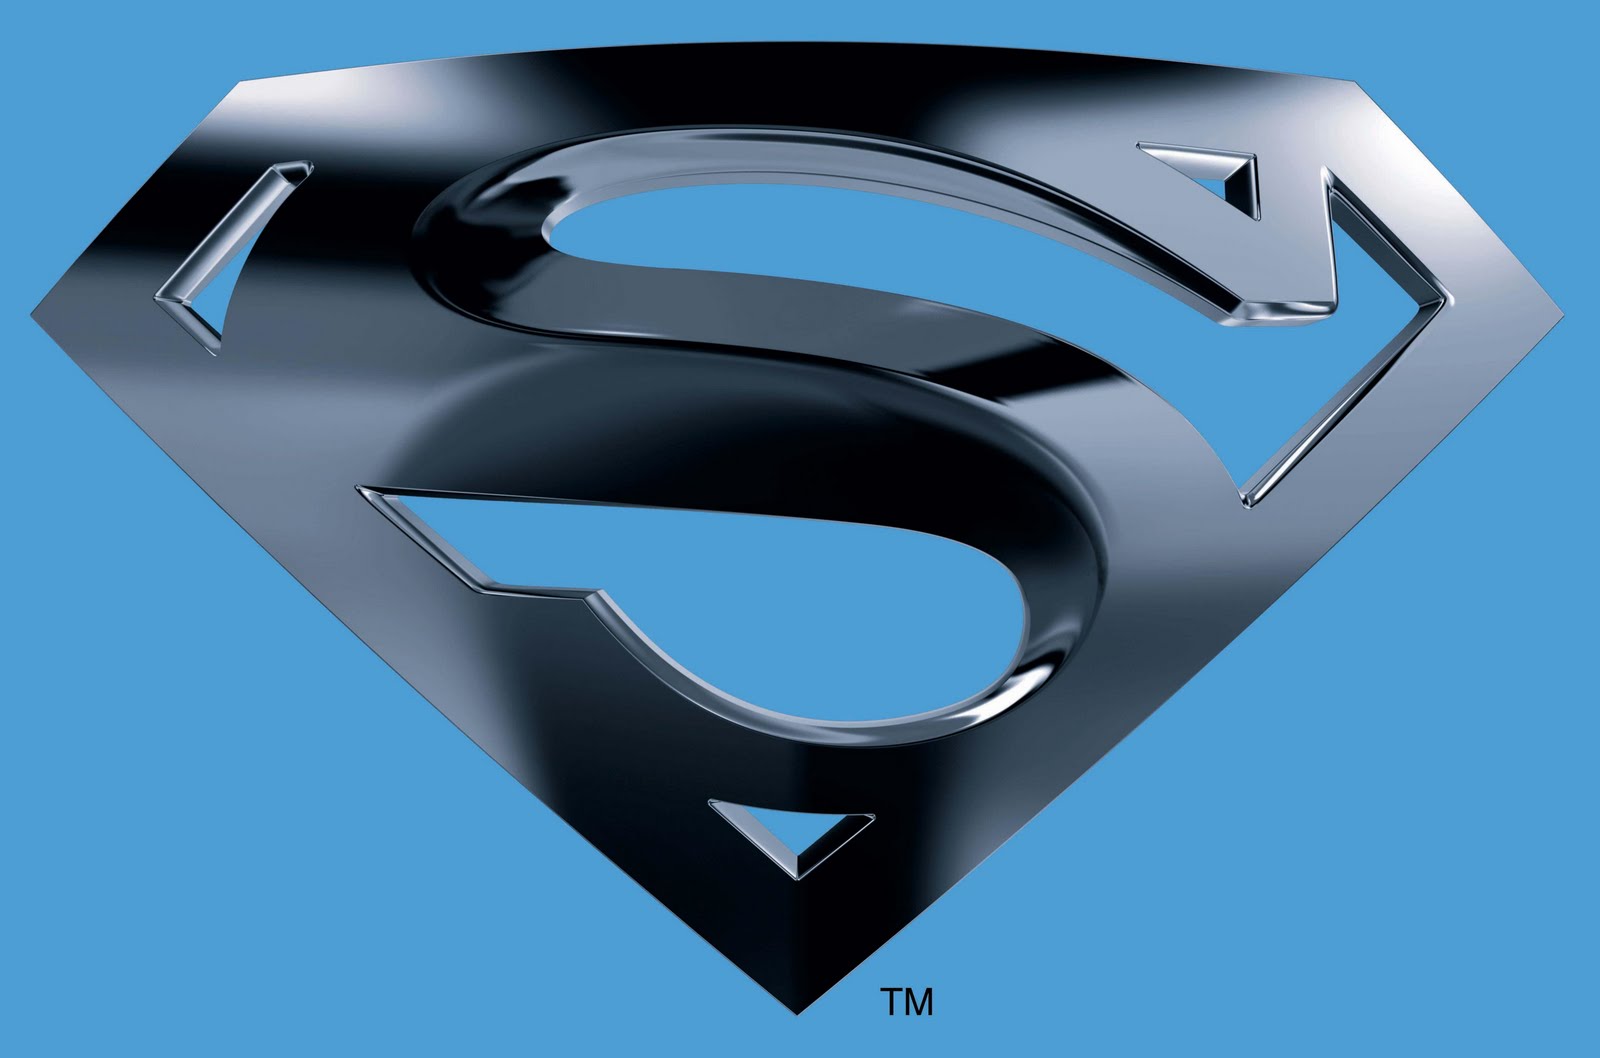  Box Superman S Logo HIgh Definition Wallpapers Backgrounds HD